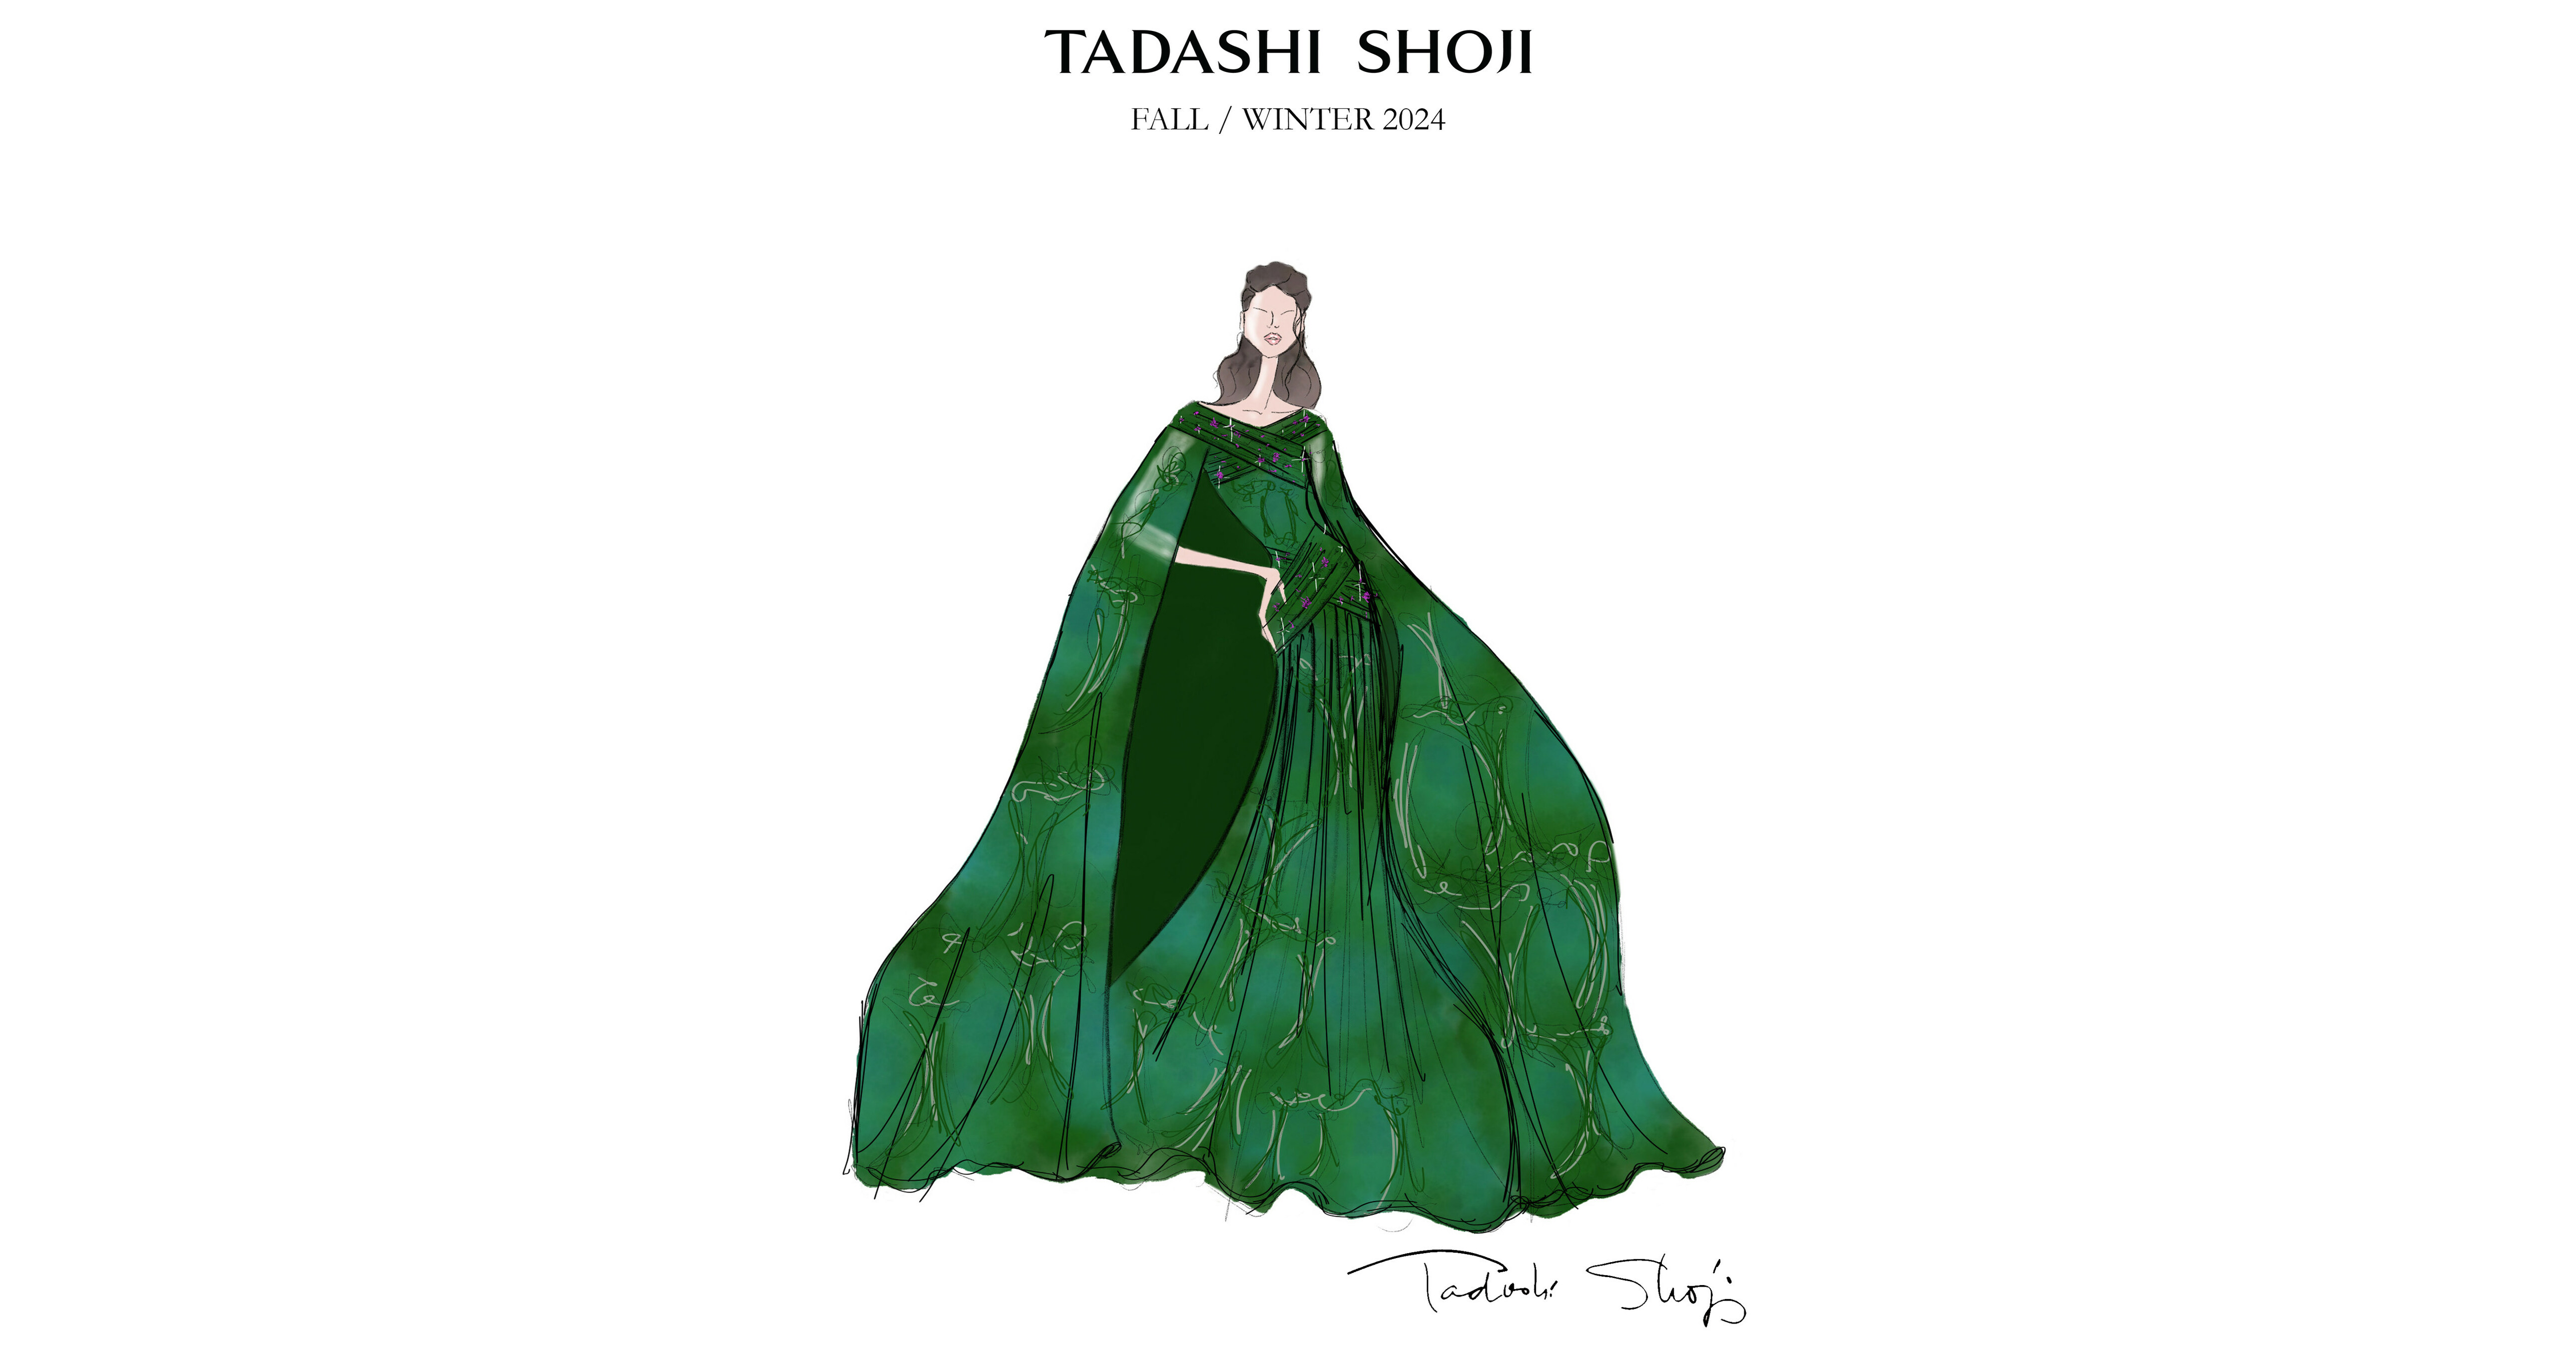 New York Fashion Week: Tadashi Shoji’s Fall / Winter 2024 Collection captures the spirit of the woods